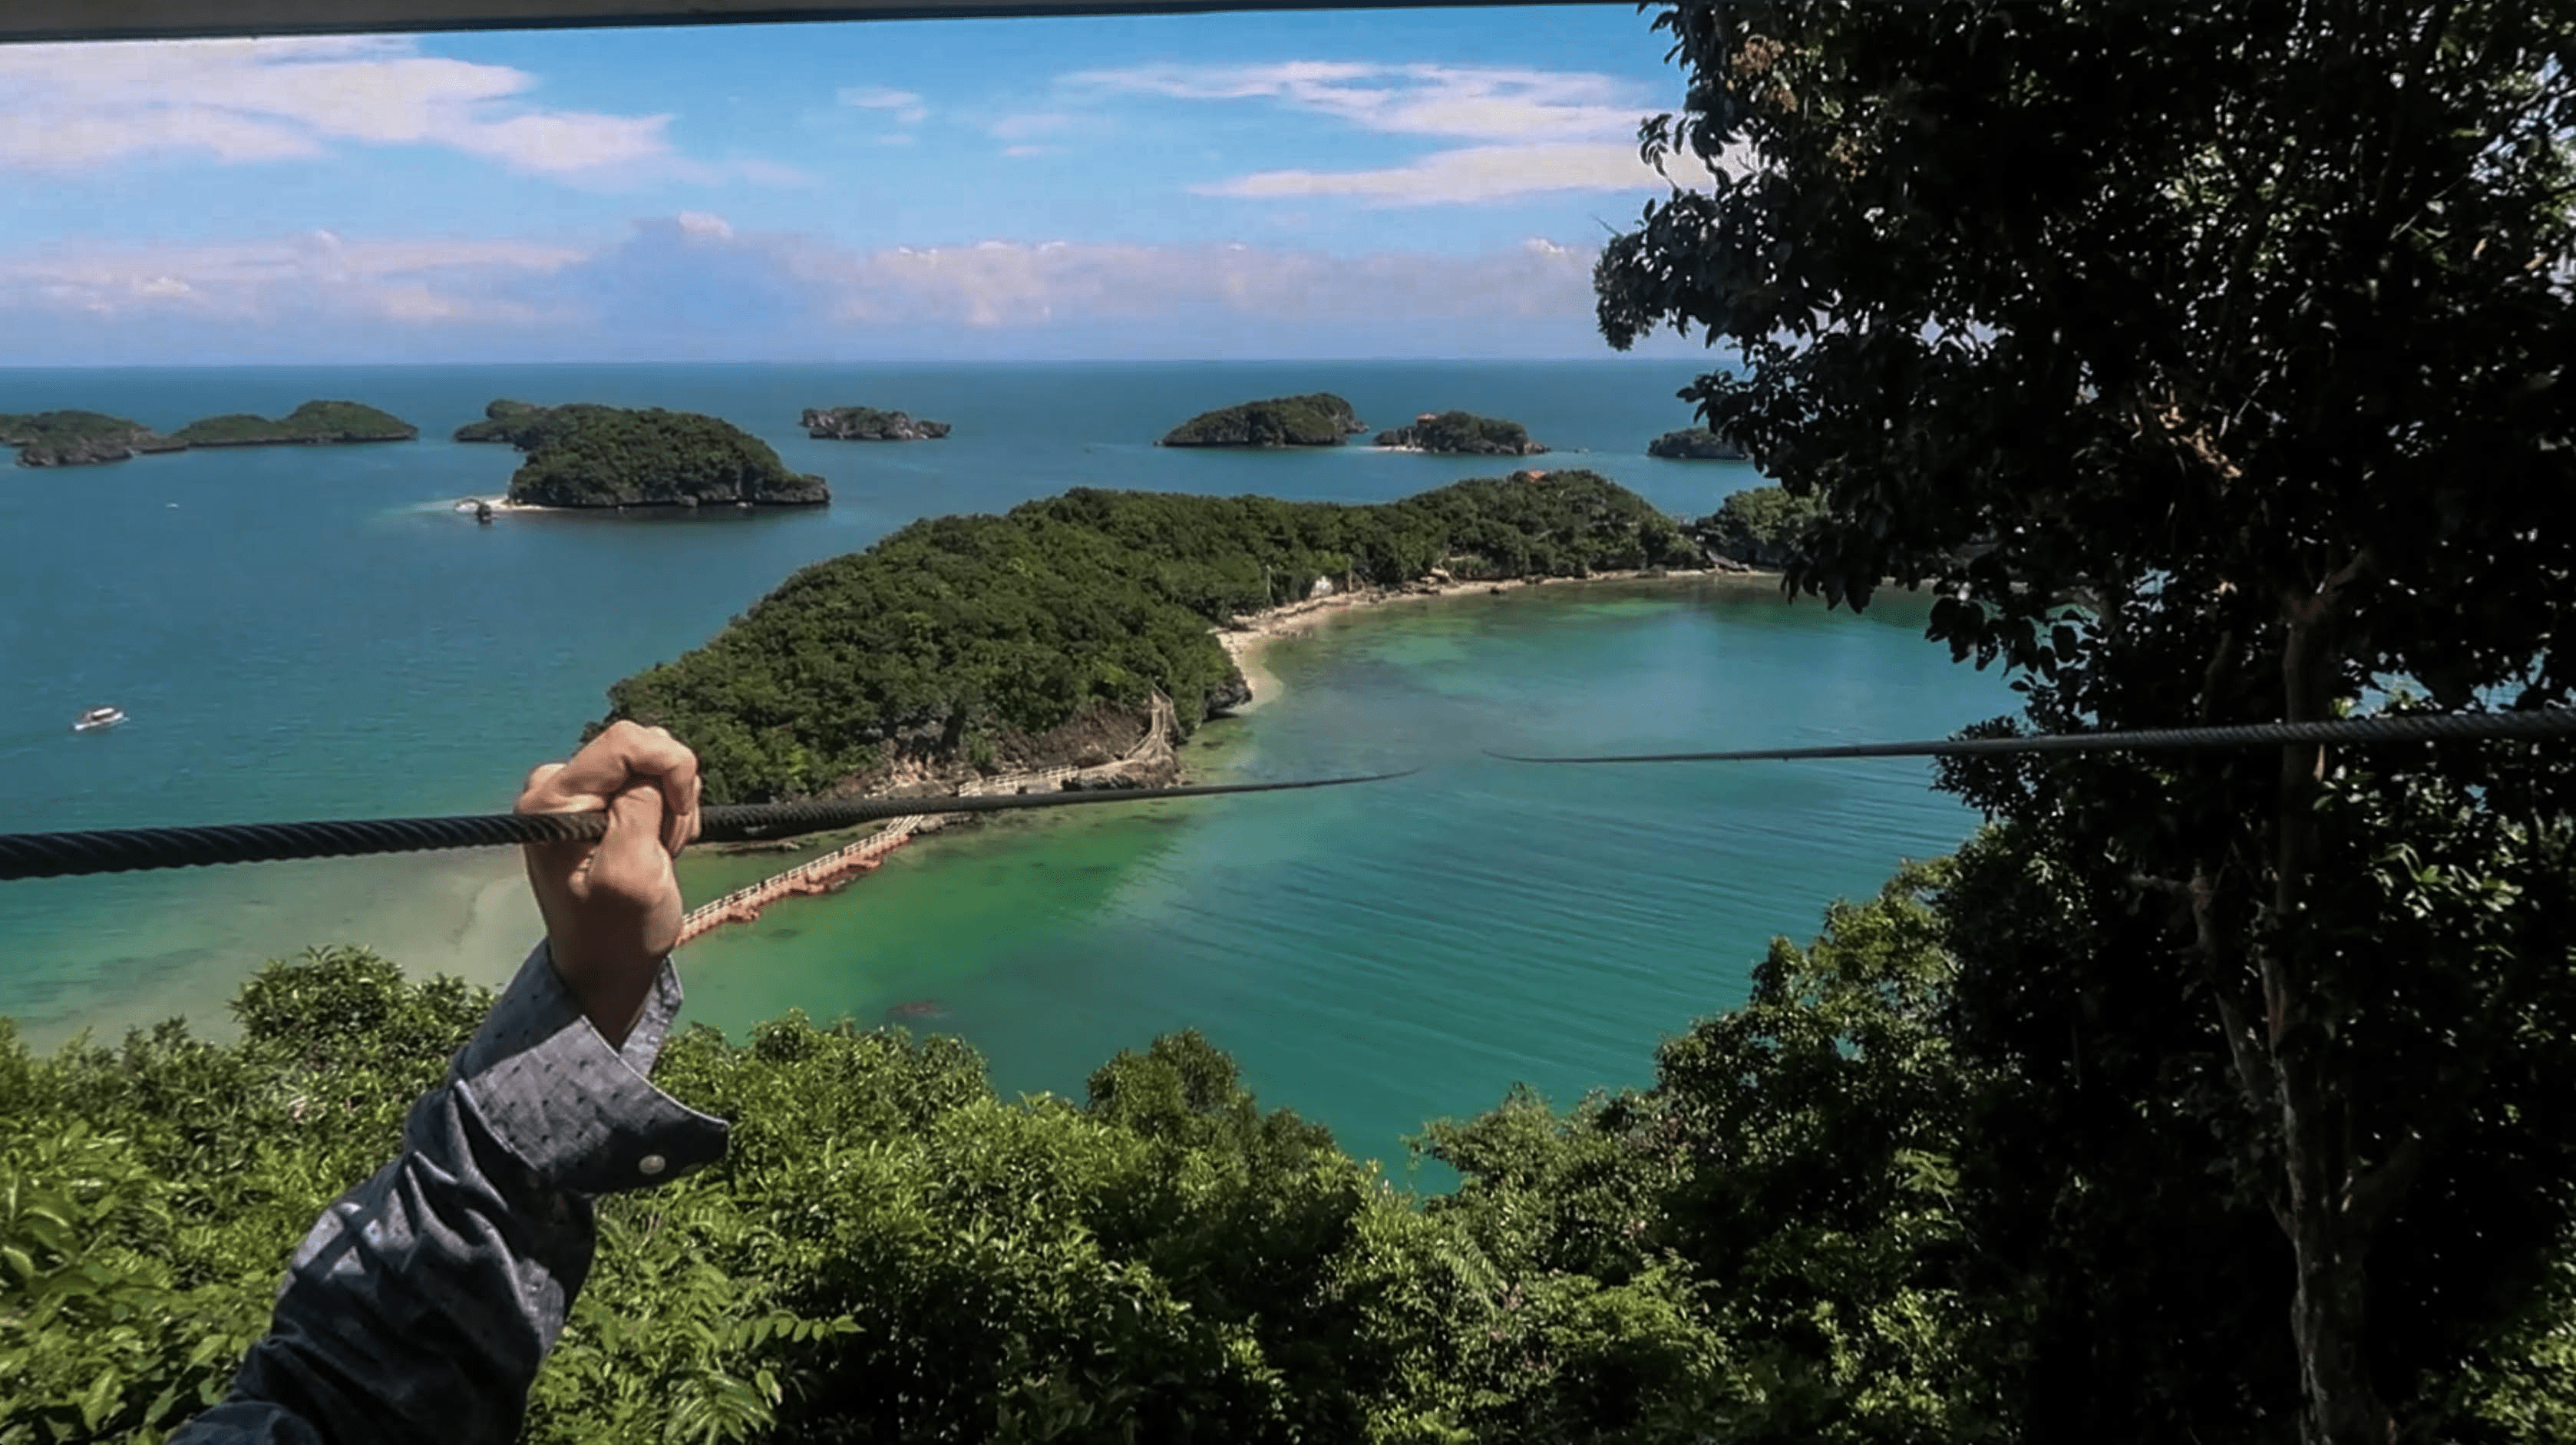 lennythroughpardise touching rope of zip-line at hundred islands pangasinan philippines